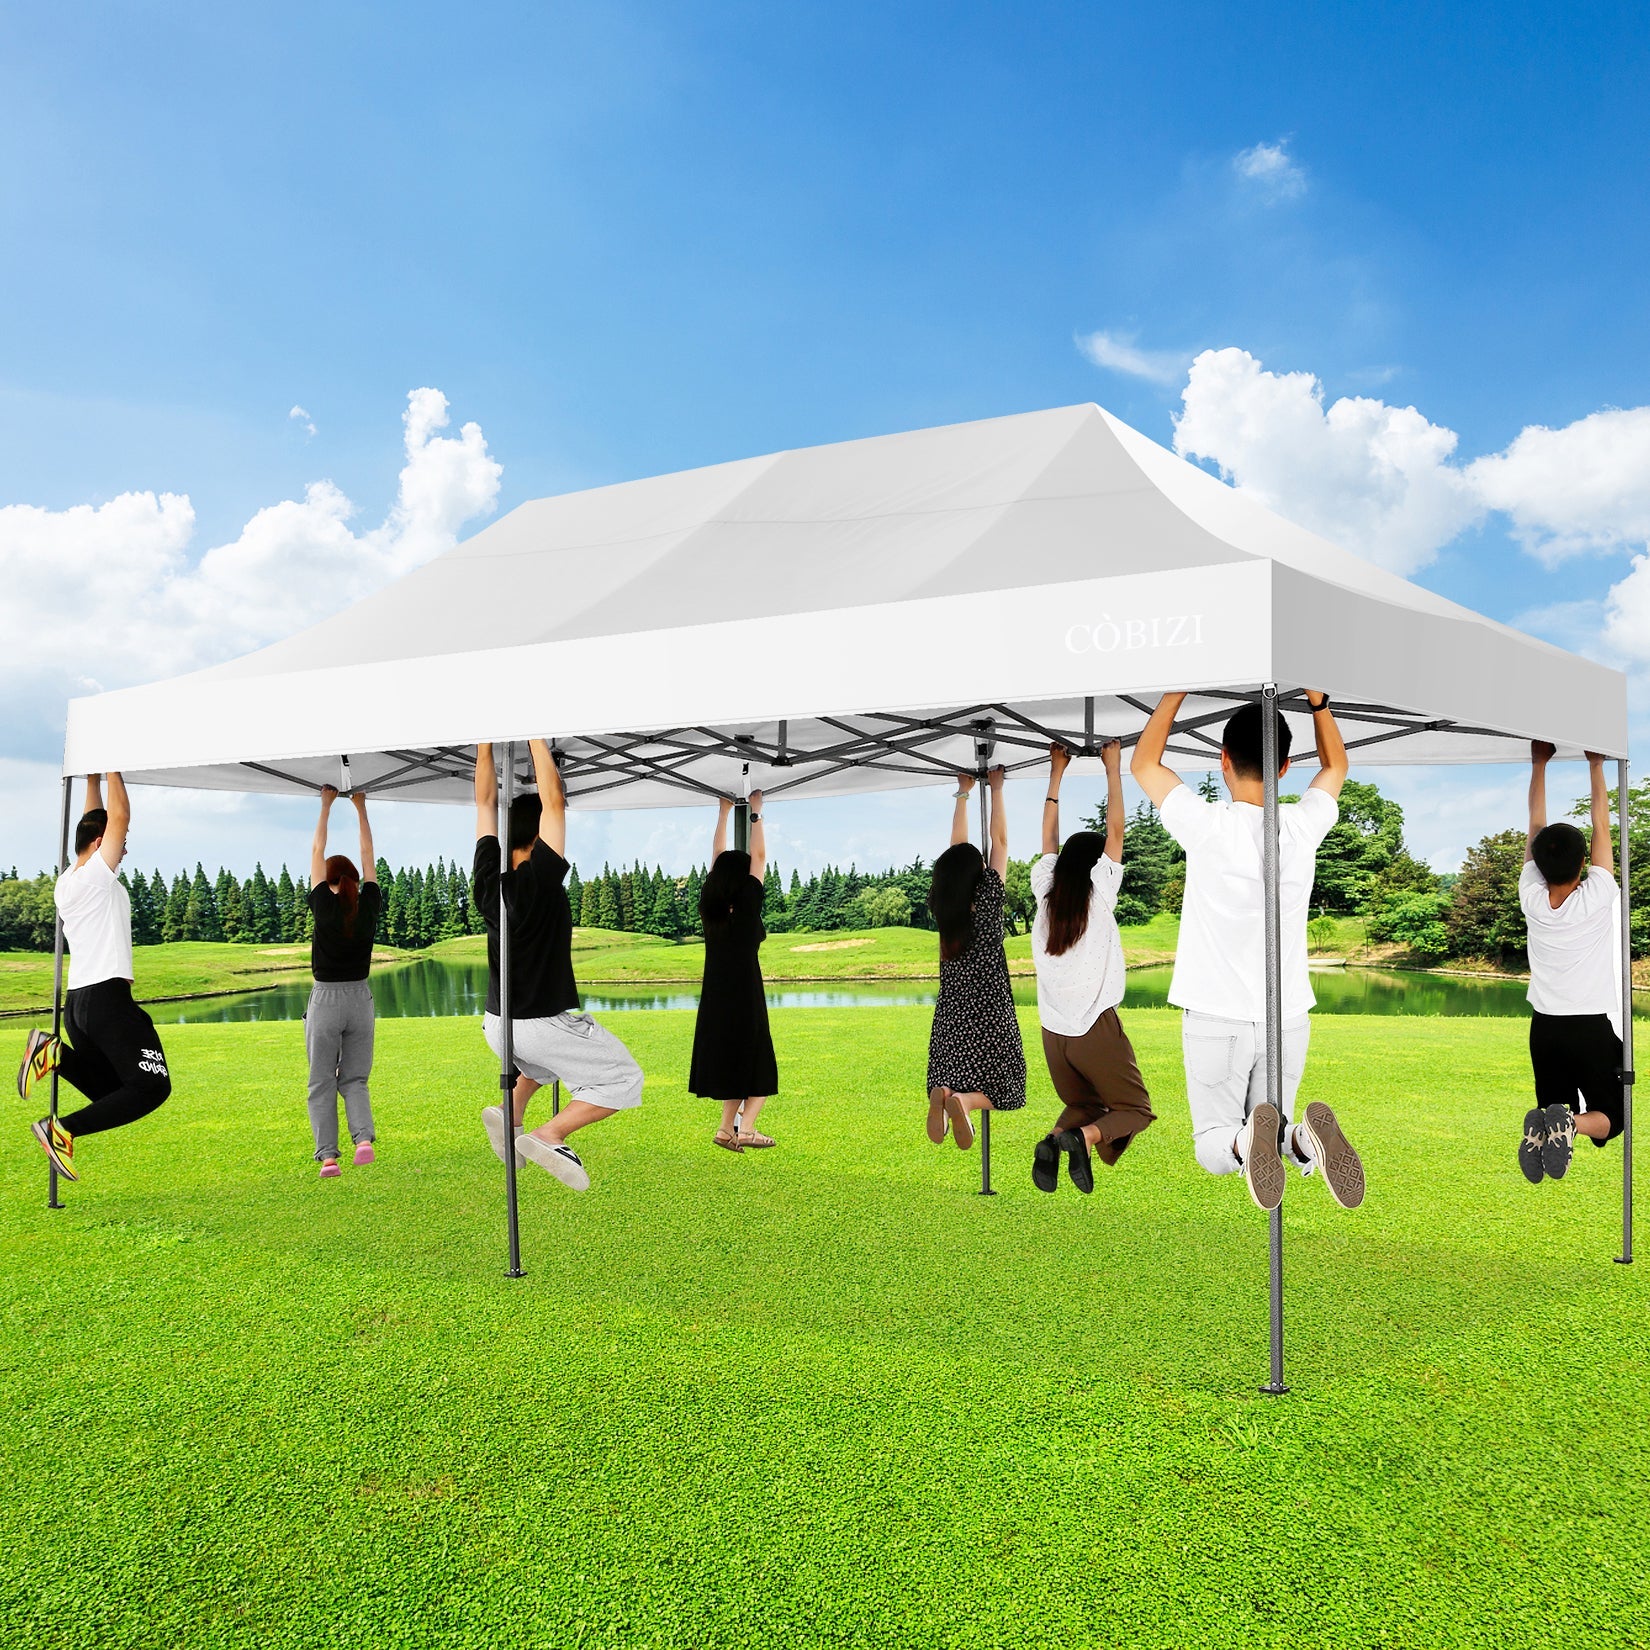 10'x20' Pop Up Canopy Waterproof Folding Tent Outdoor Easy Set-up Instant Tent Heavy Duty Commercial Wedding Party Shelter with 6 Removable Sidewalls, 6 Sandbags, Roller Bag, White